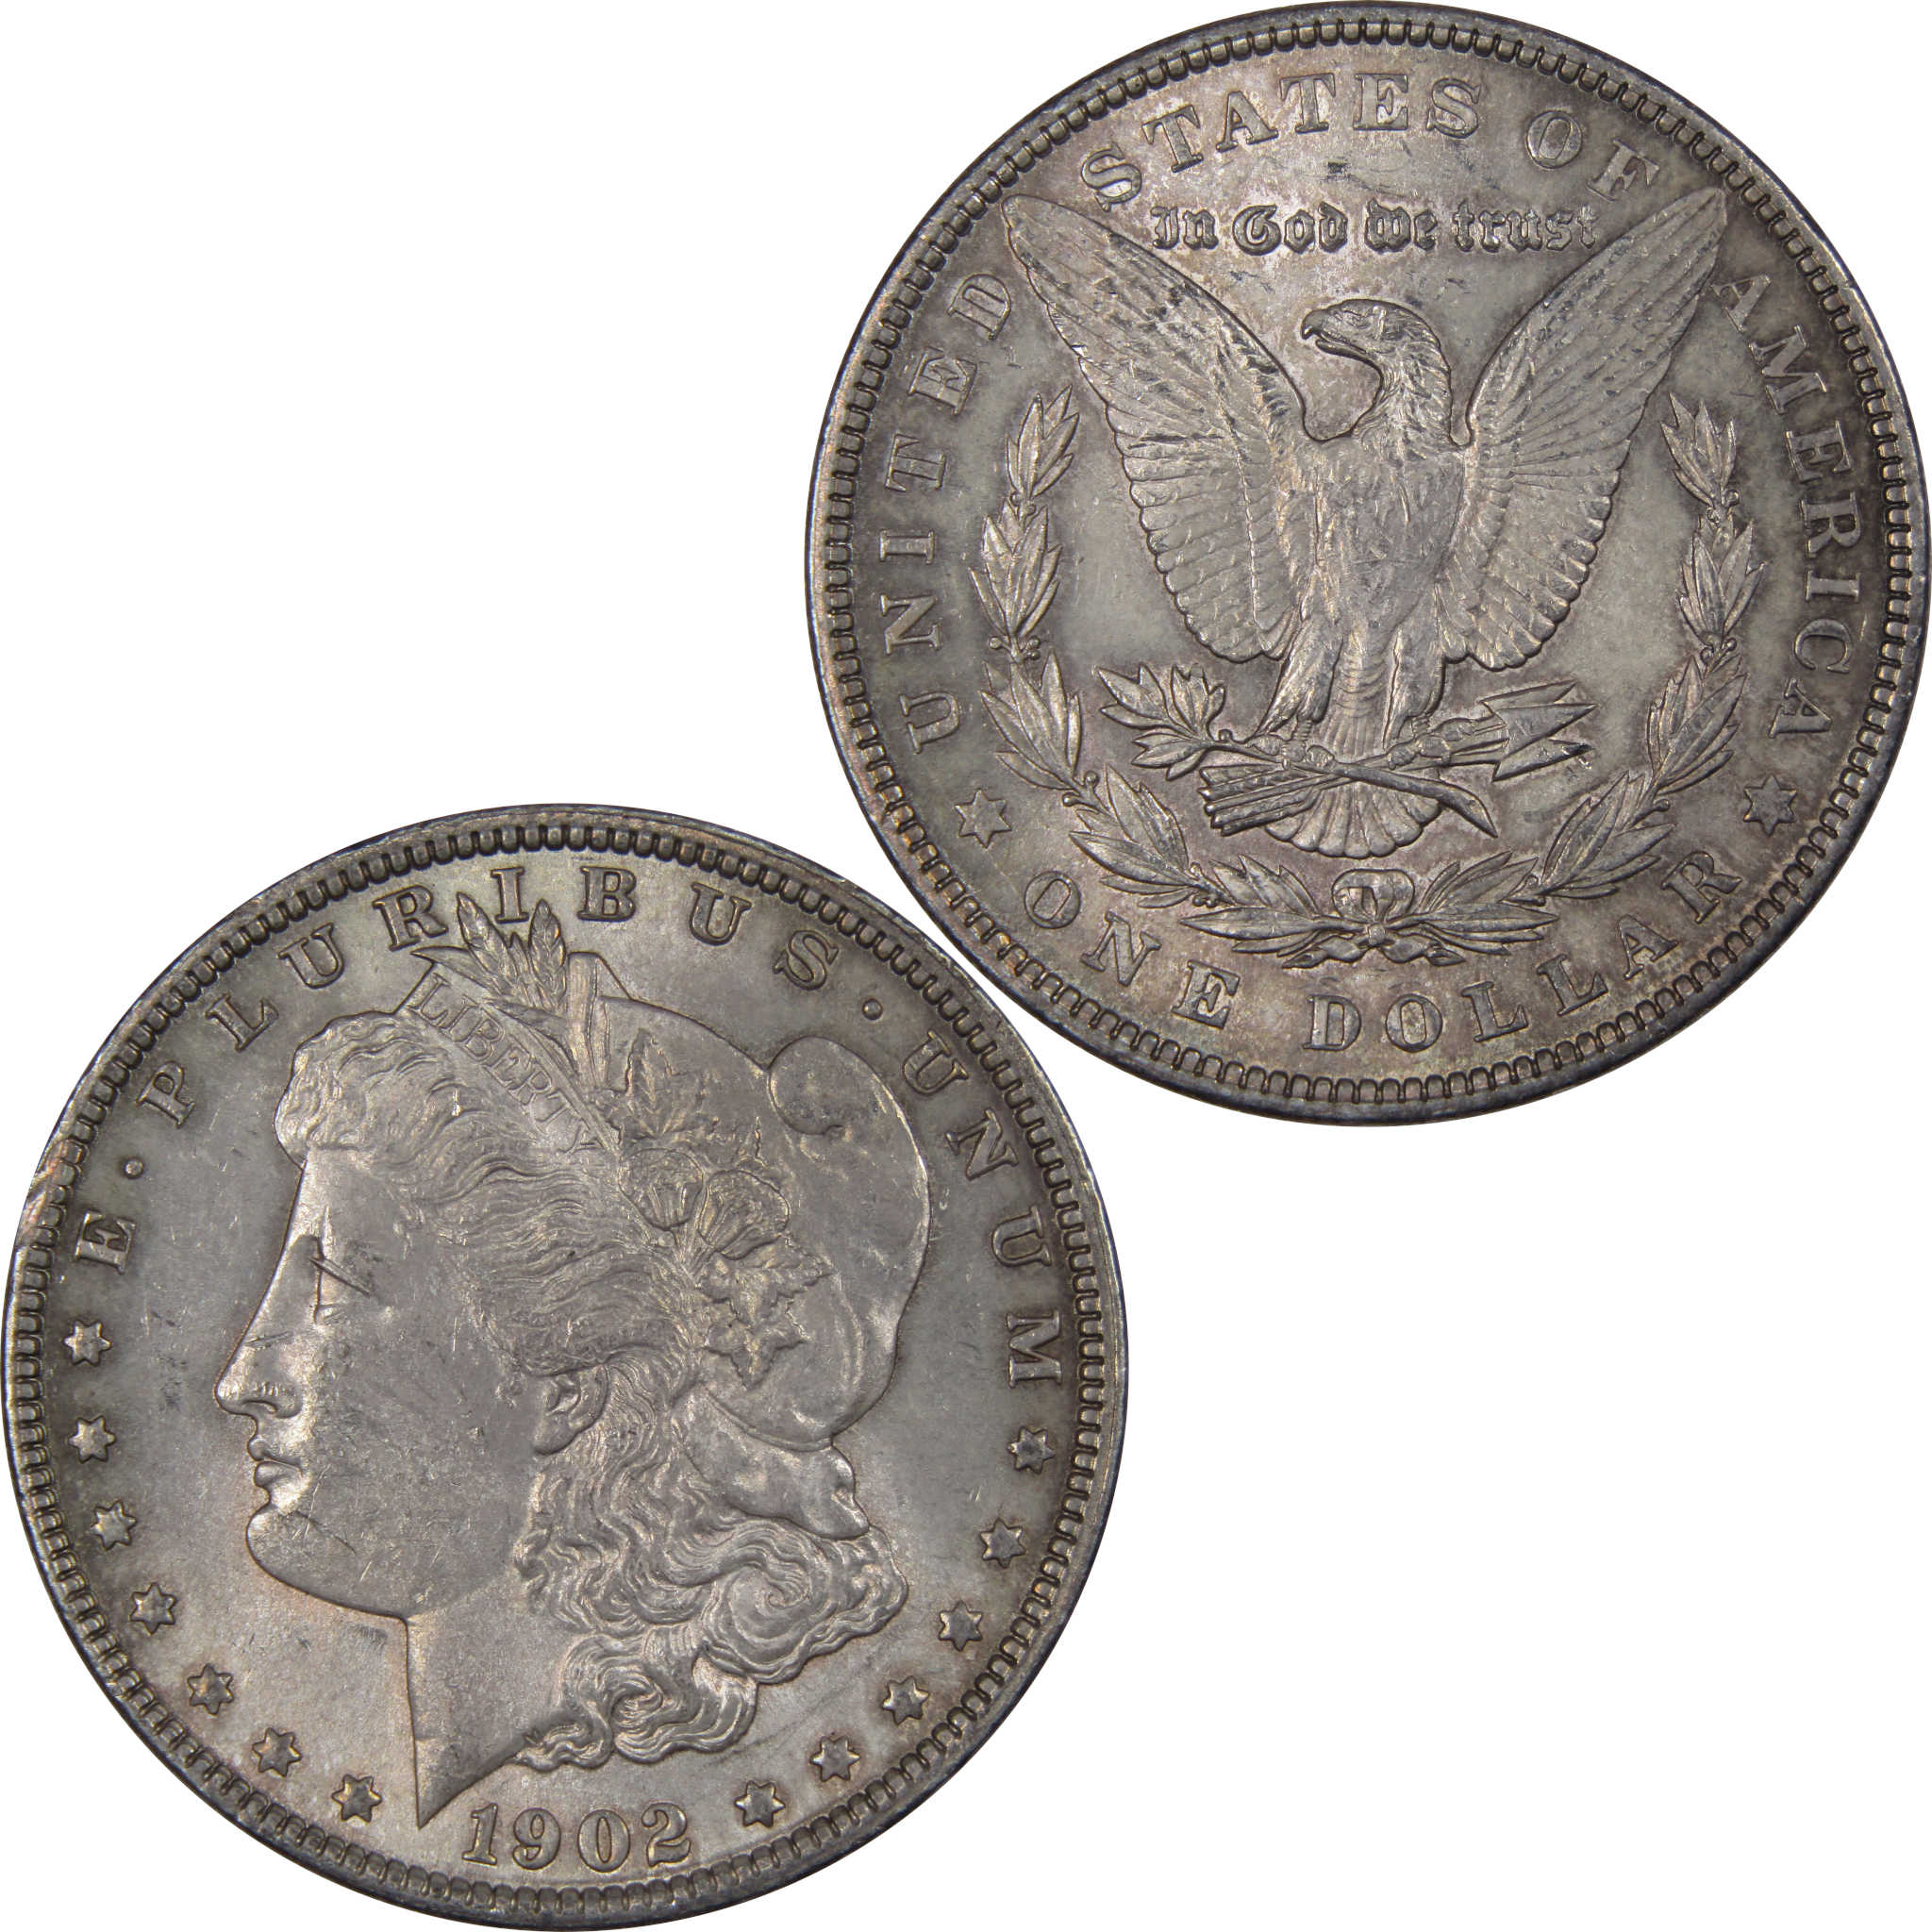 1902 Morgan Dollar Uncirculated Details 90% Silver Coin SKU:IPC8628 - Morgan coin - Morgan silver dollar - Morgan silver dollar for sale - Profile Coins &amp; Collectibles